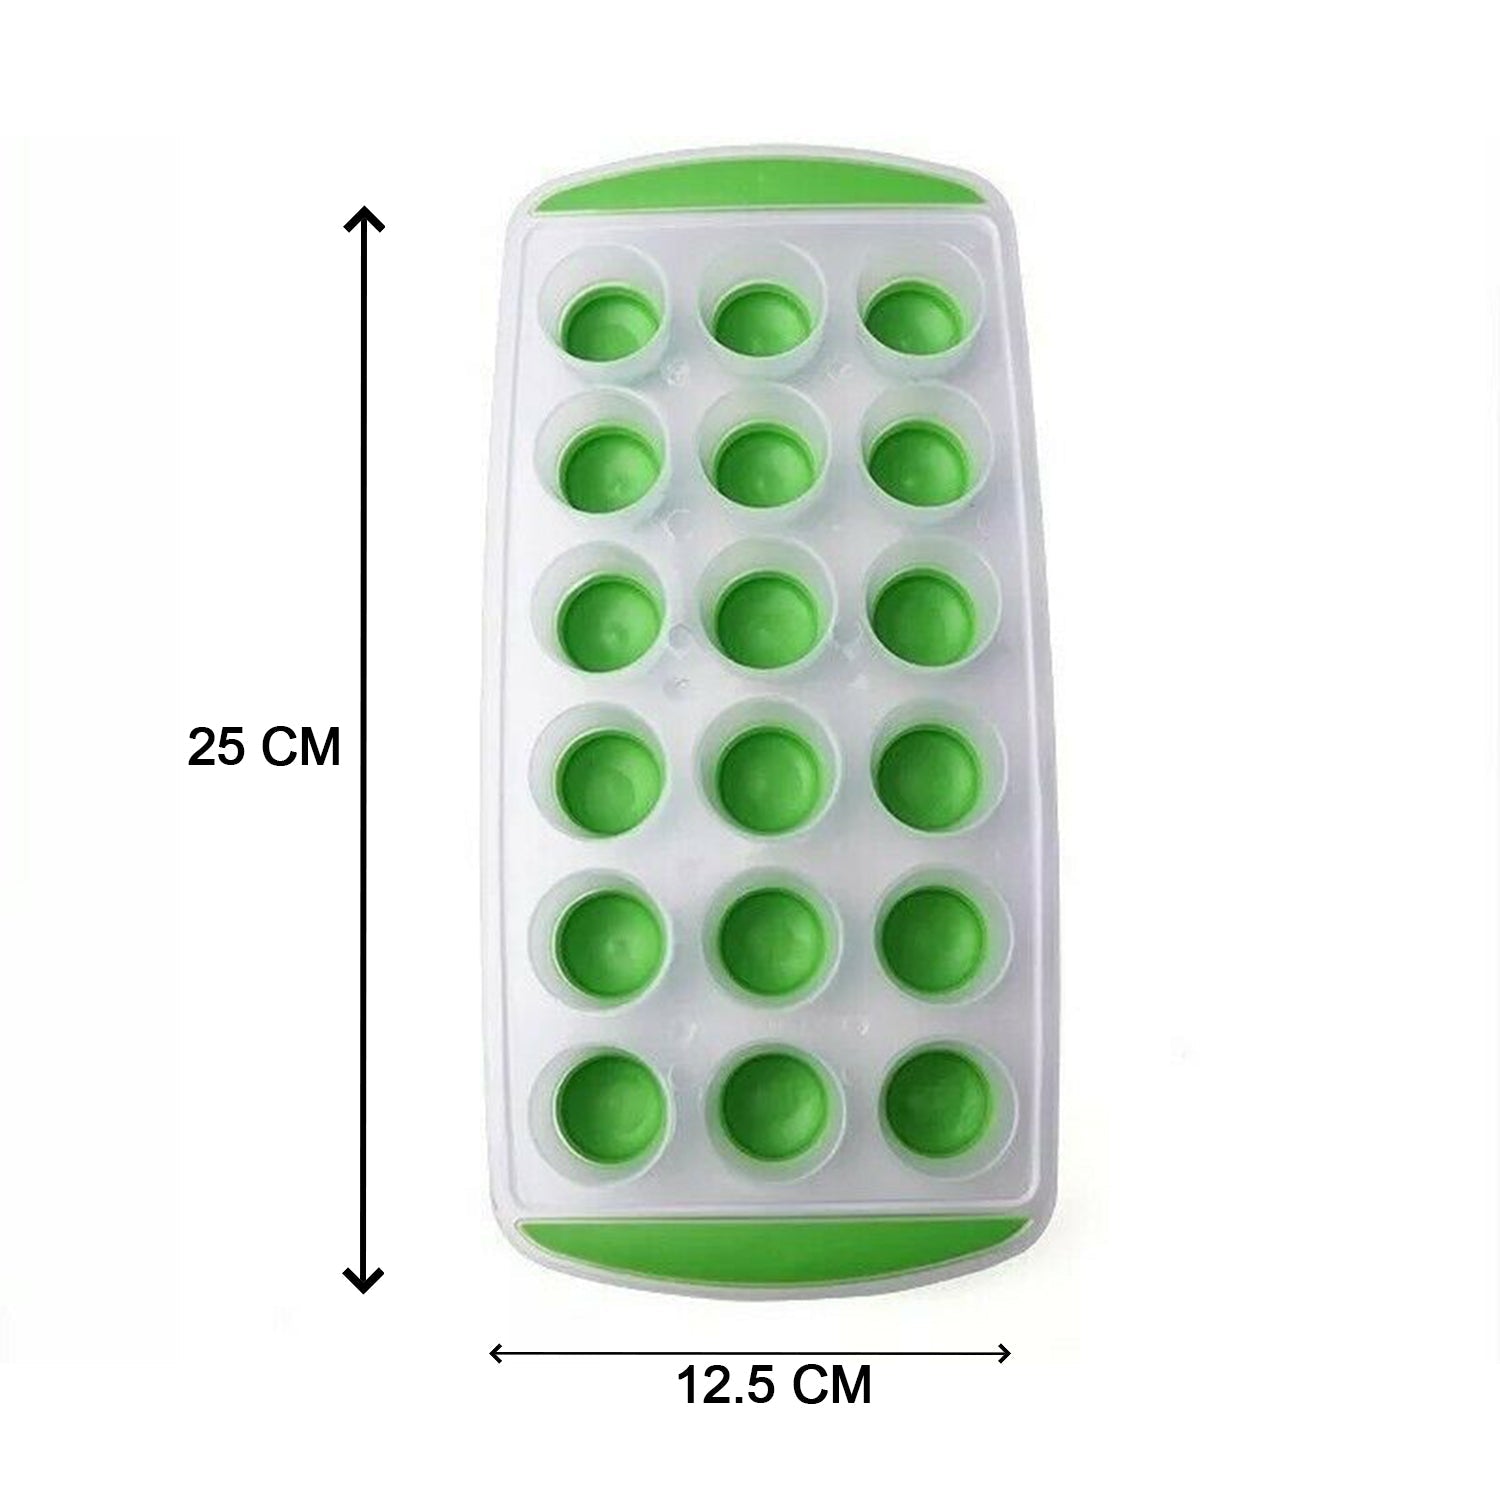 2768 18 Cavity Ice Tray Used For Producing Ice’s In Types Of Places Etc. DeoDap